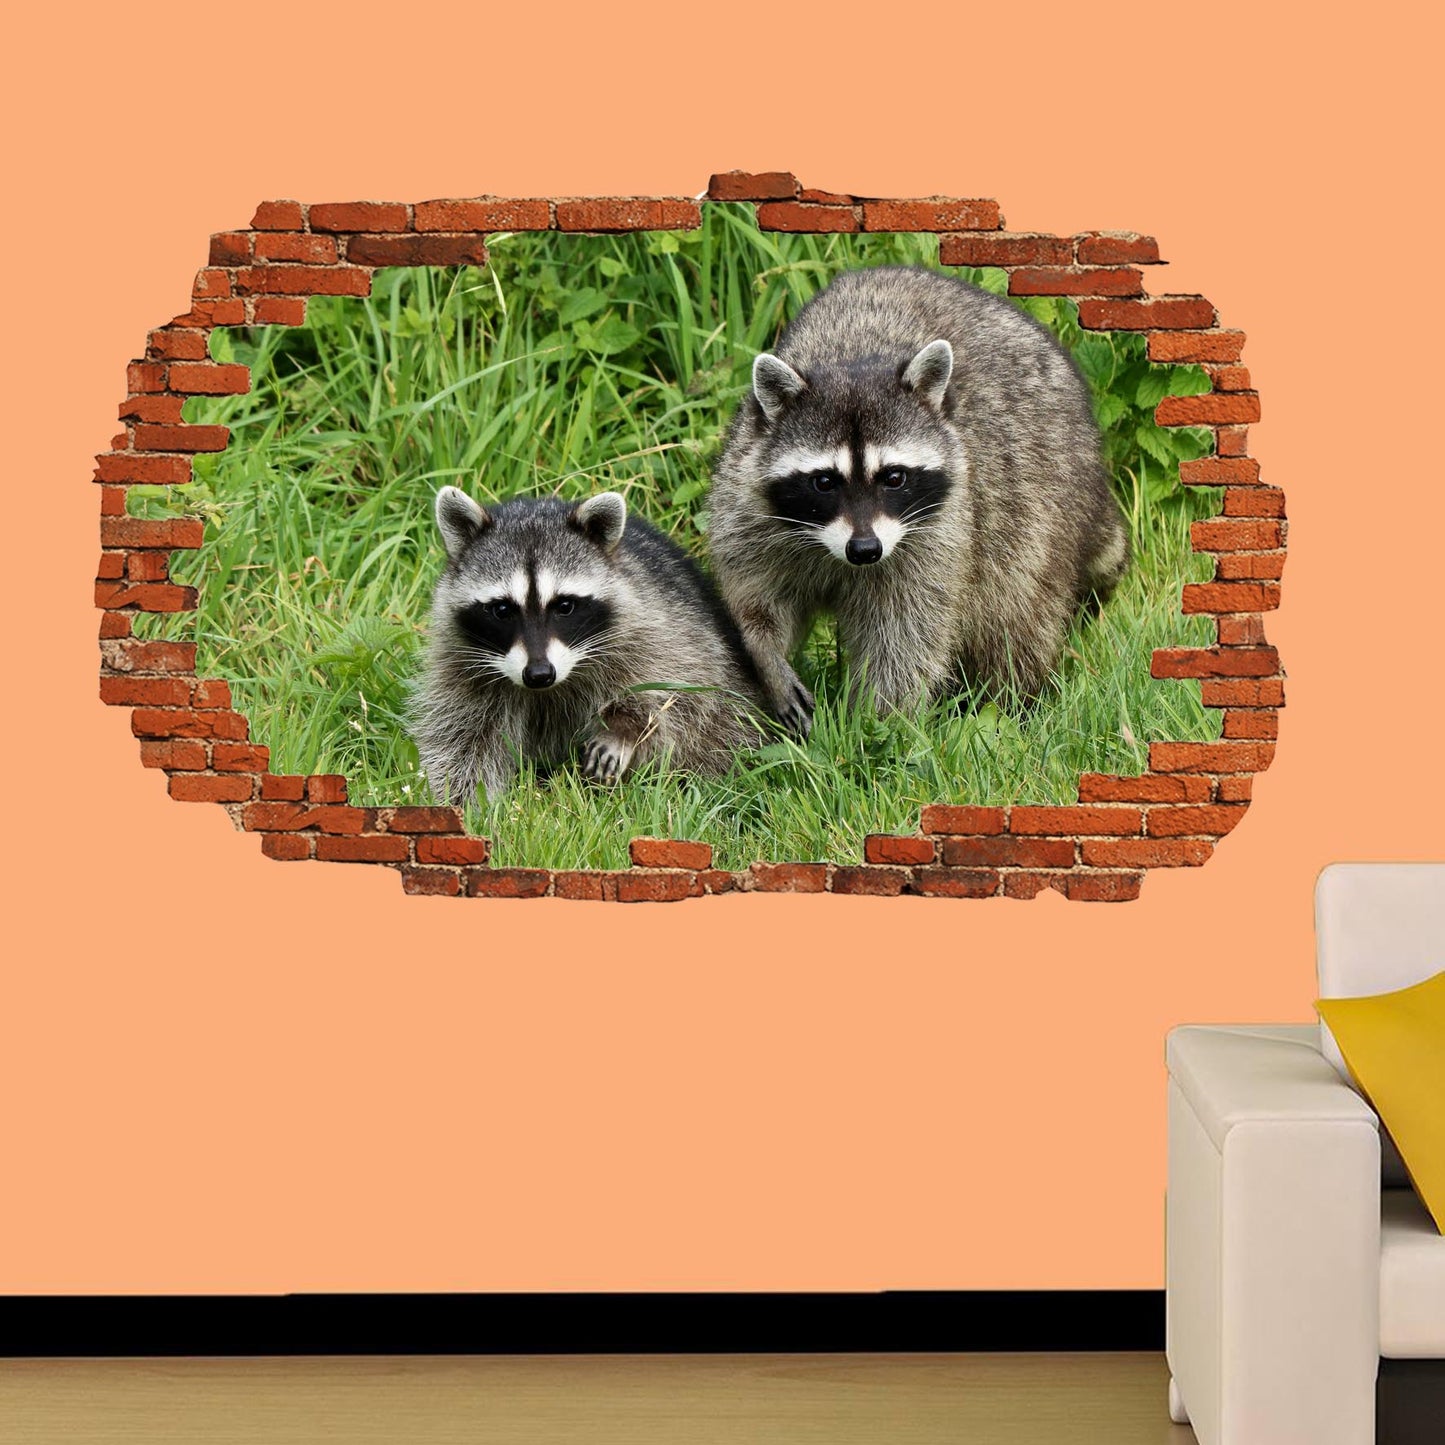 Racoon Wall Sticker Poster Decal Mural